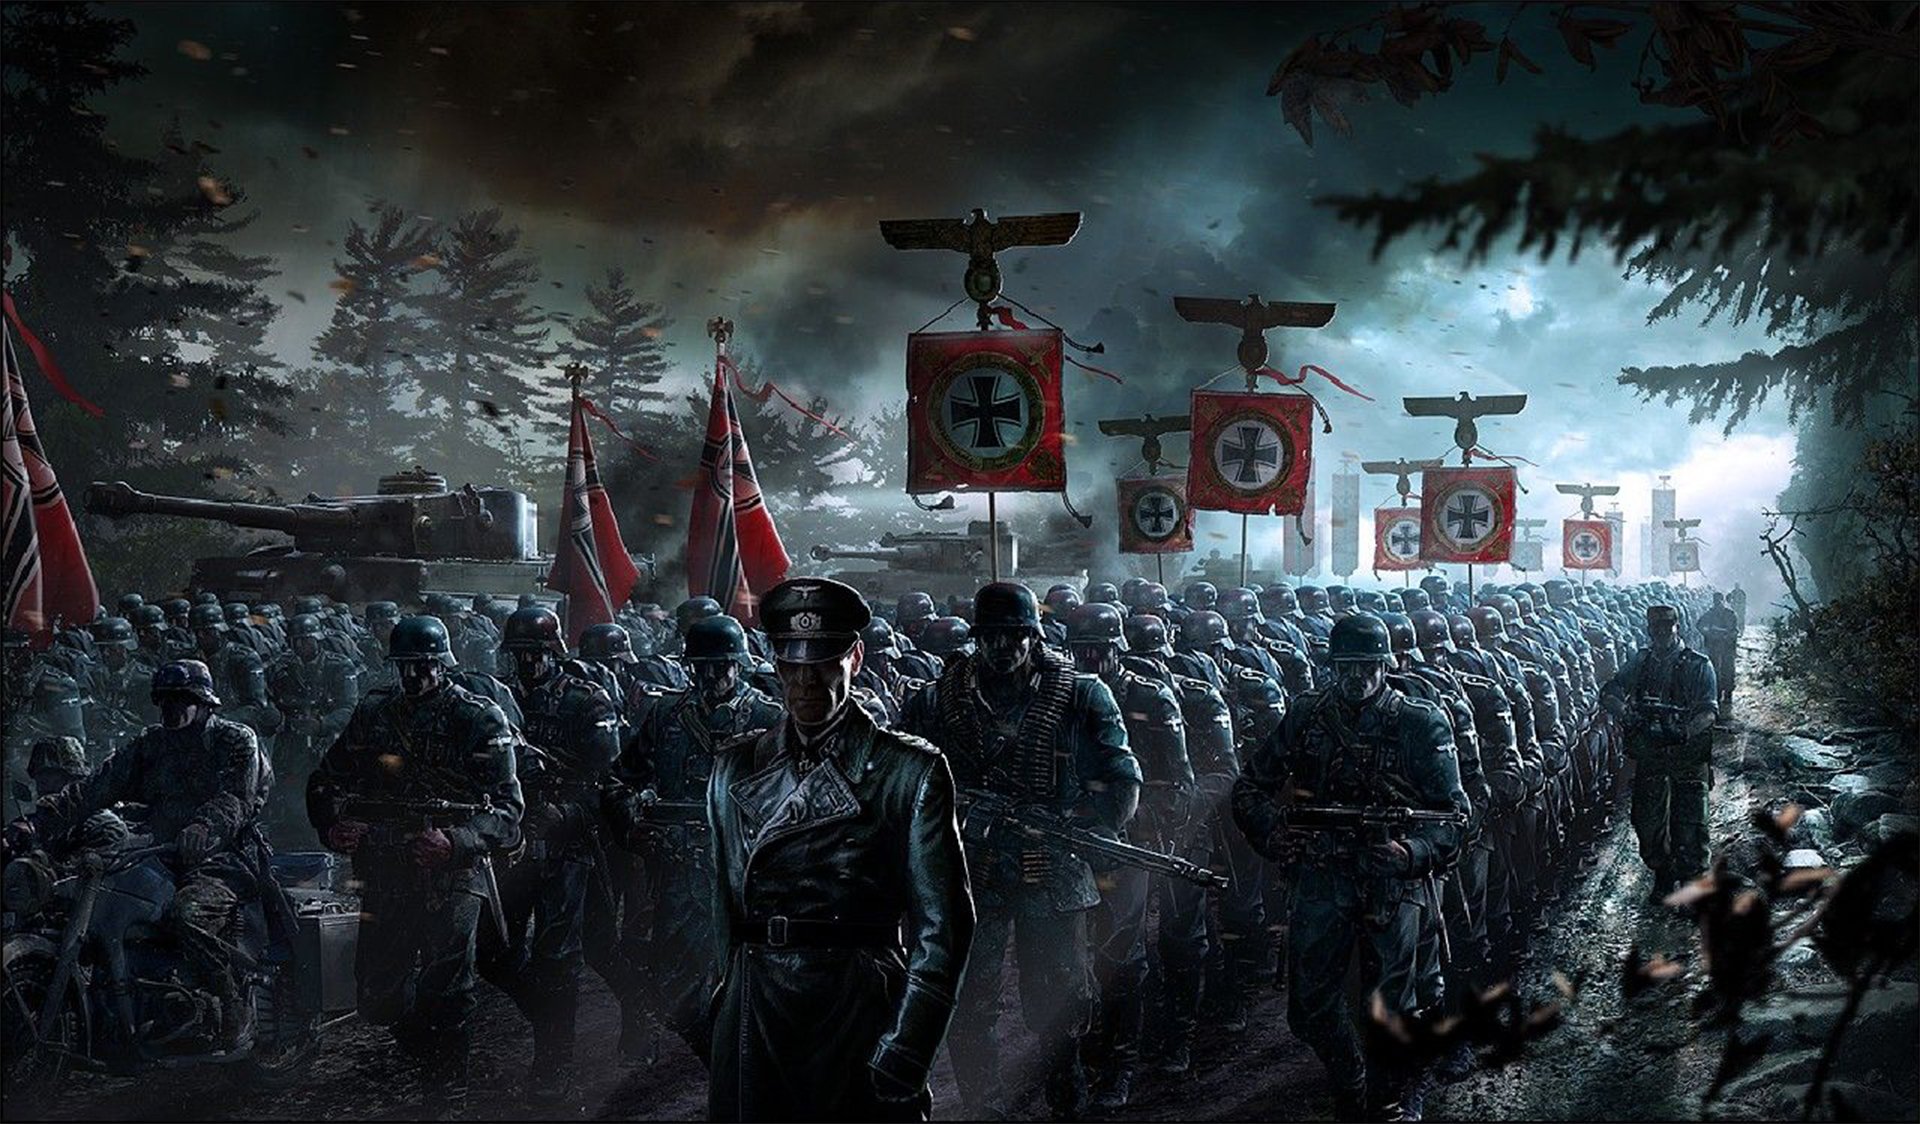 A Sick Wallpaper For The Axis Players Struggling Against